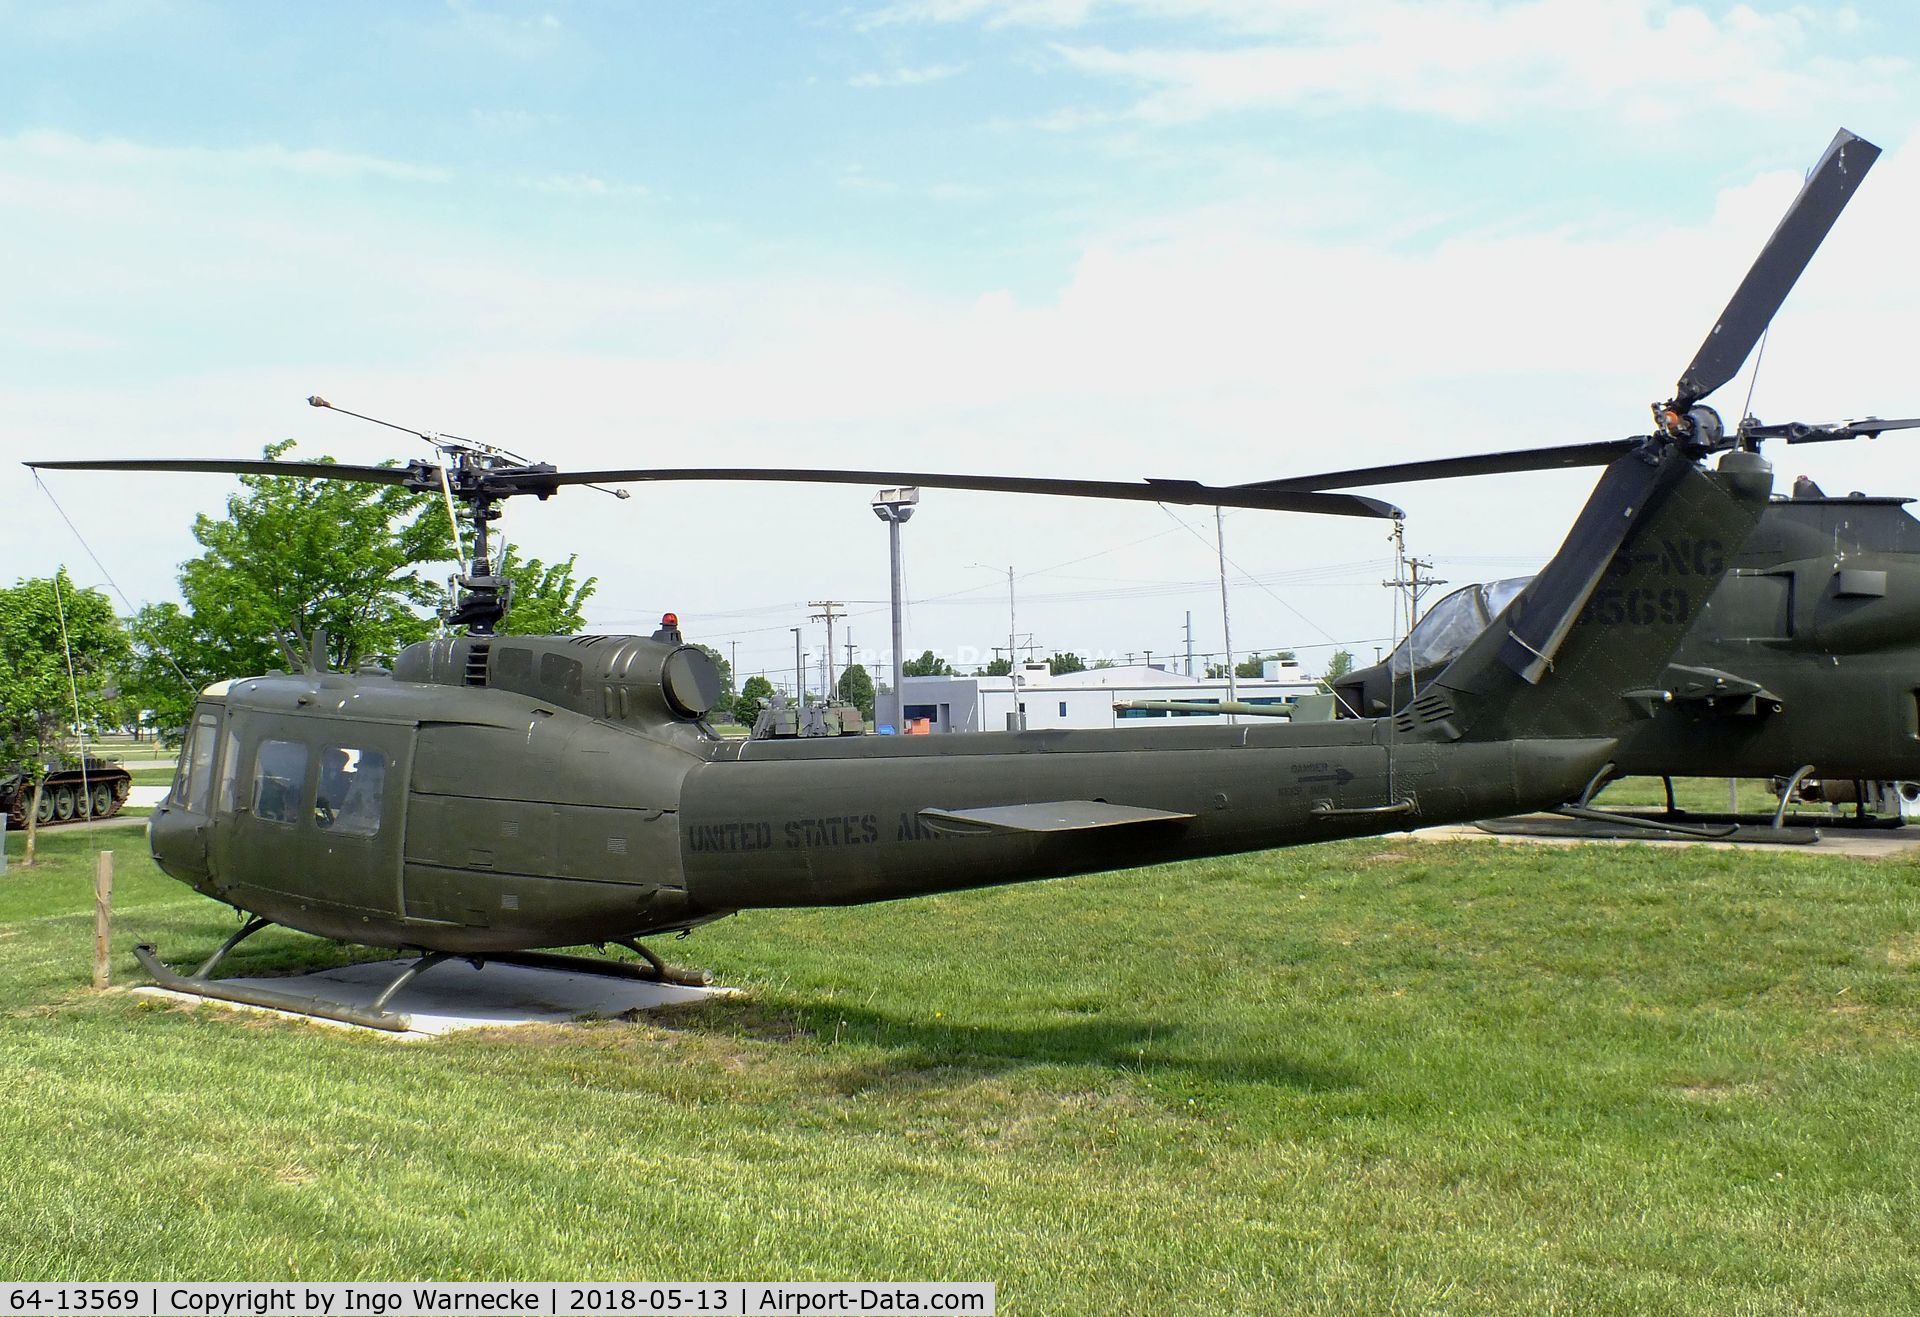 64-13569, 1965 Bell UH-1H Iroquois C/N 4276, Bell UH-1H Iroquois at the Museum of the Kansas National Guard, Topeka KS